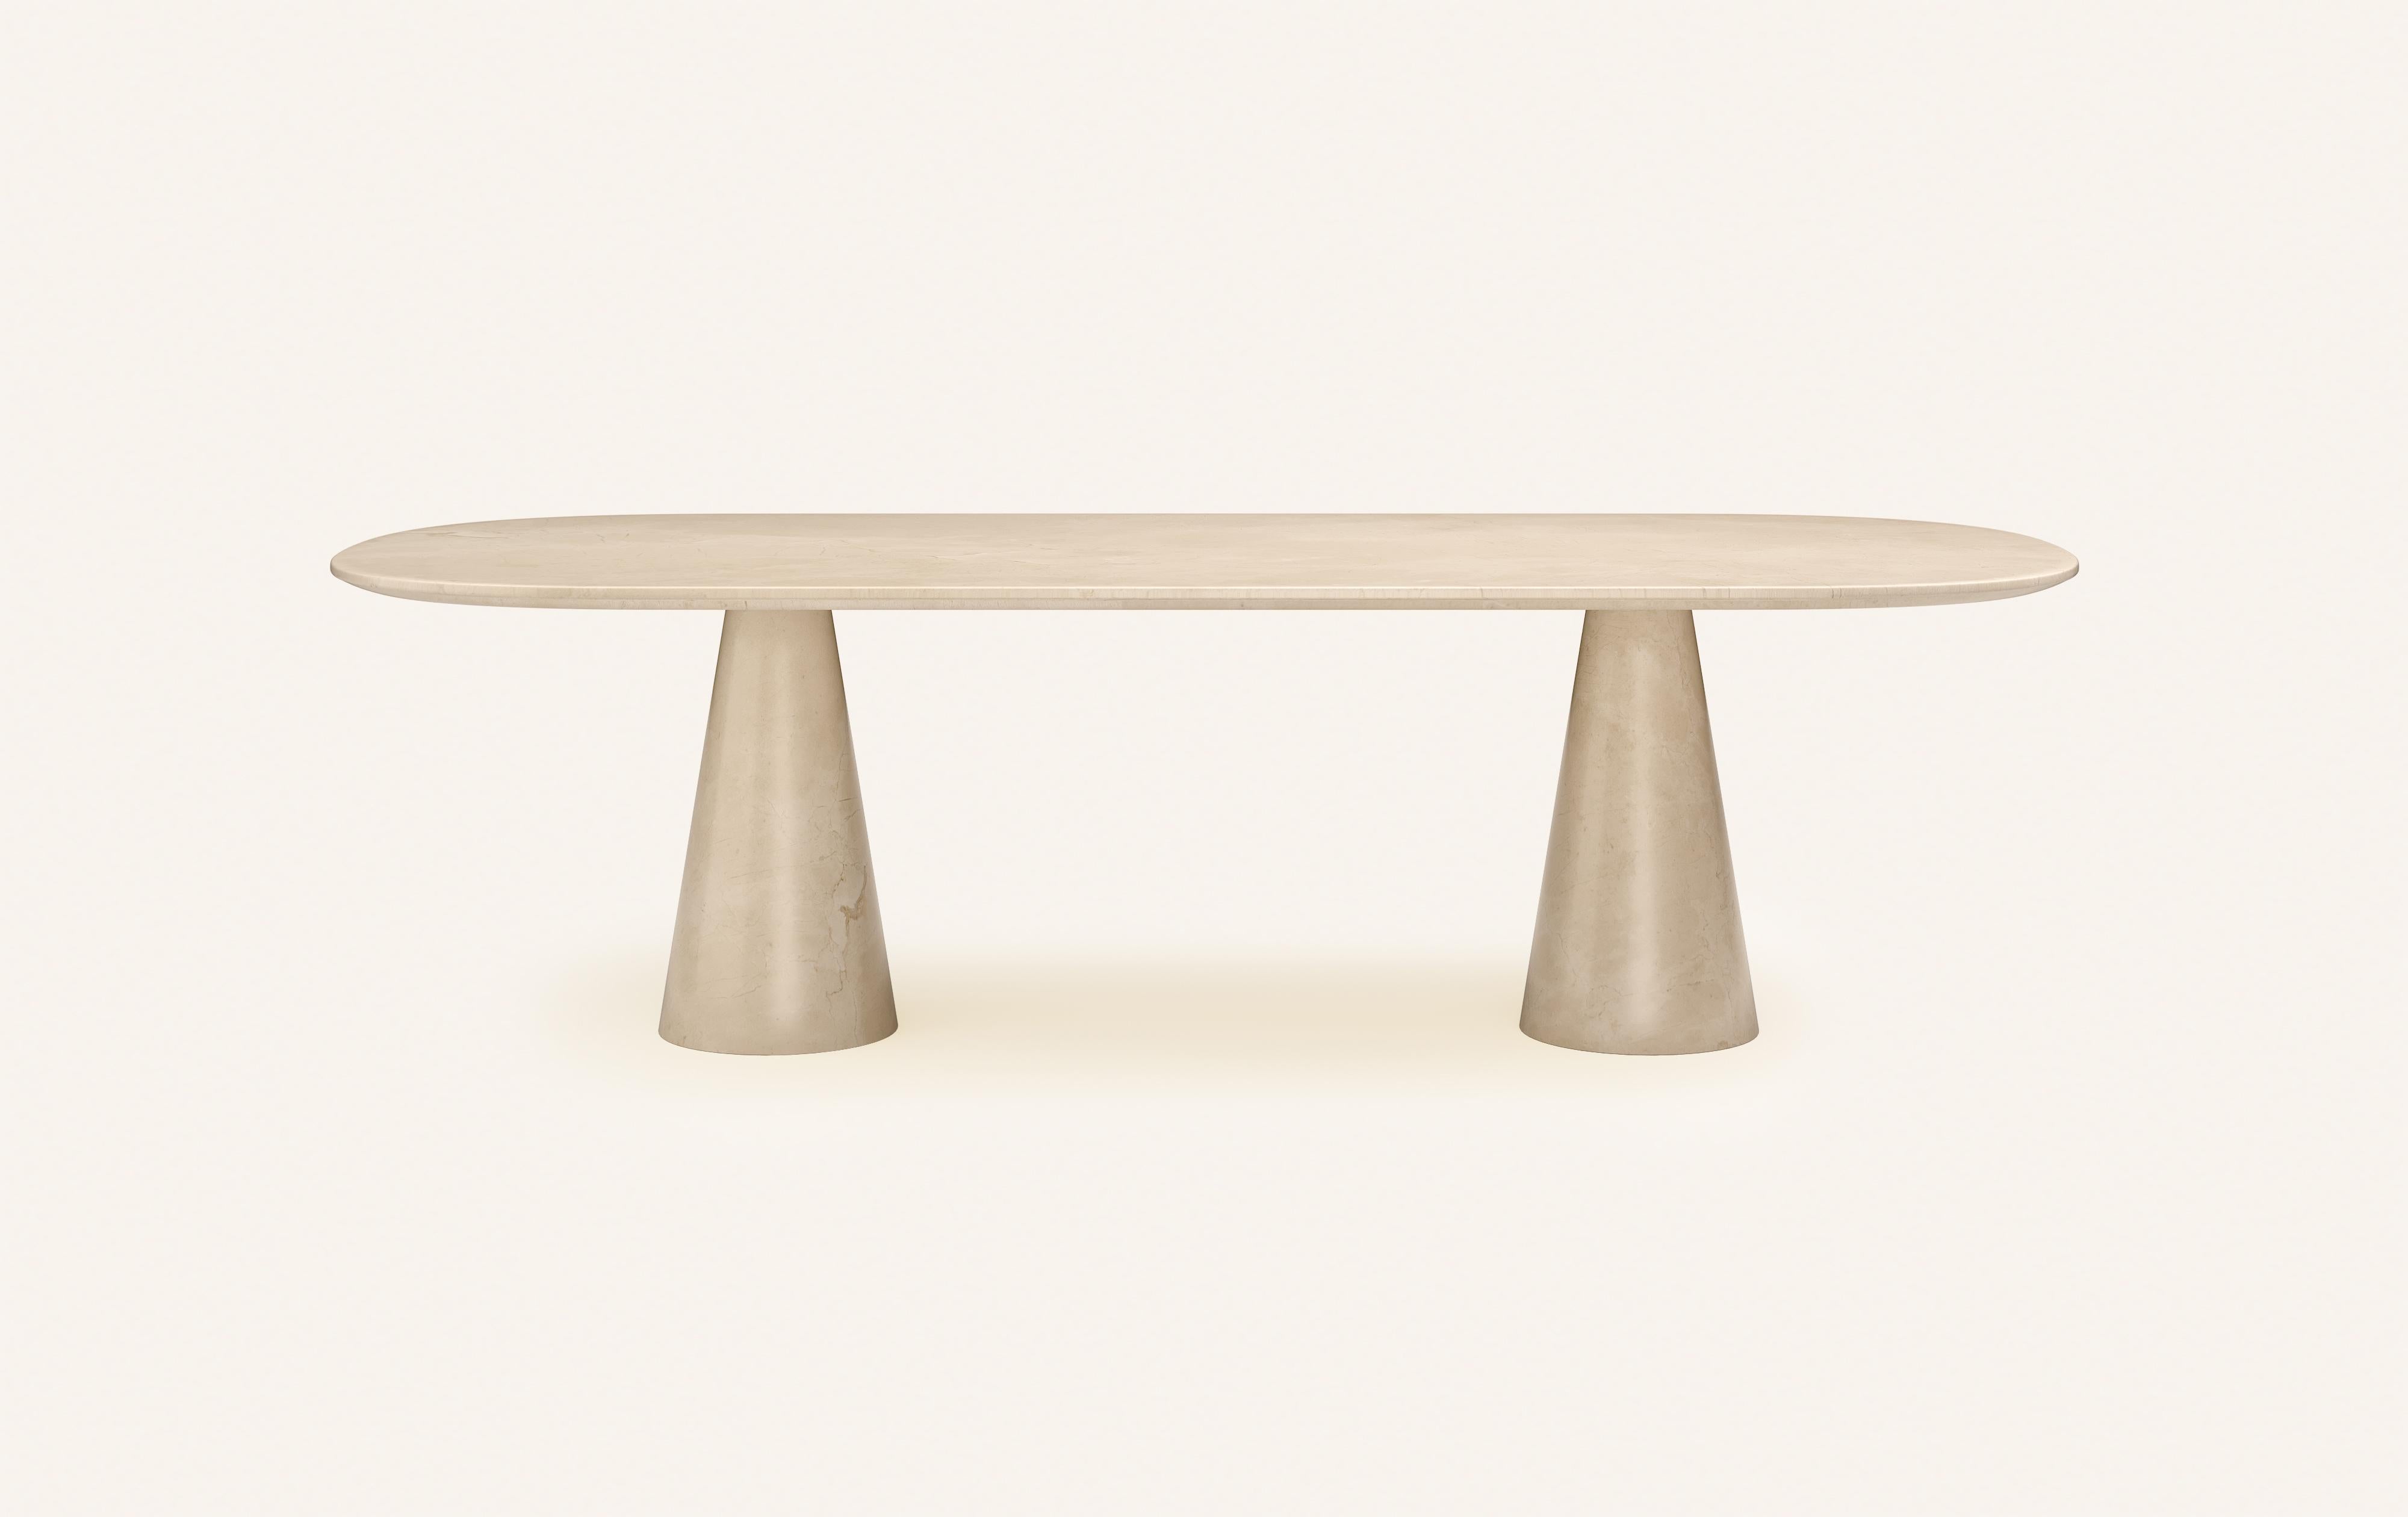 SIMPLISTIC YET MUSCULAR FORMS INFLUENCED BY POST MODERN ITALIAN DESIGN.

DIMENSIONS: 
118”L x 48”W x 30”H: 
- 1.5